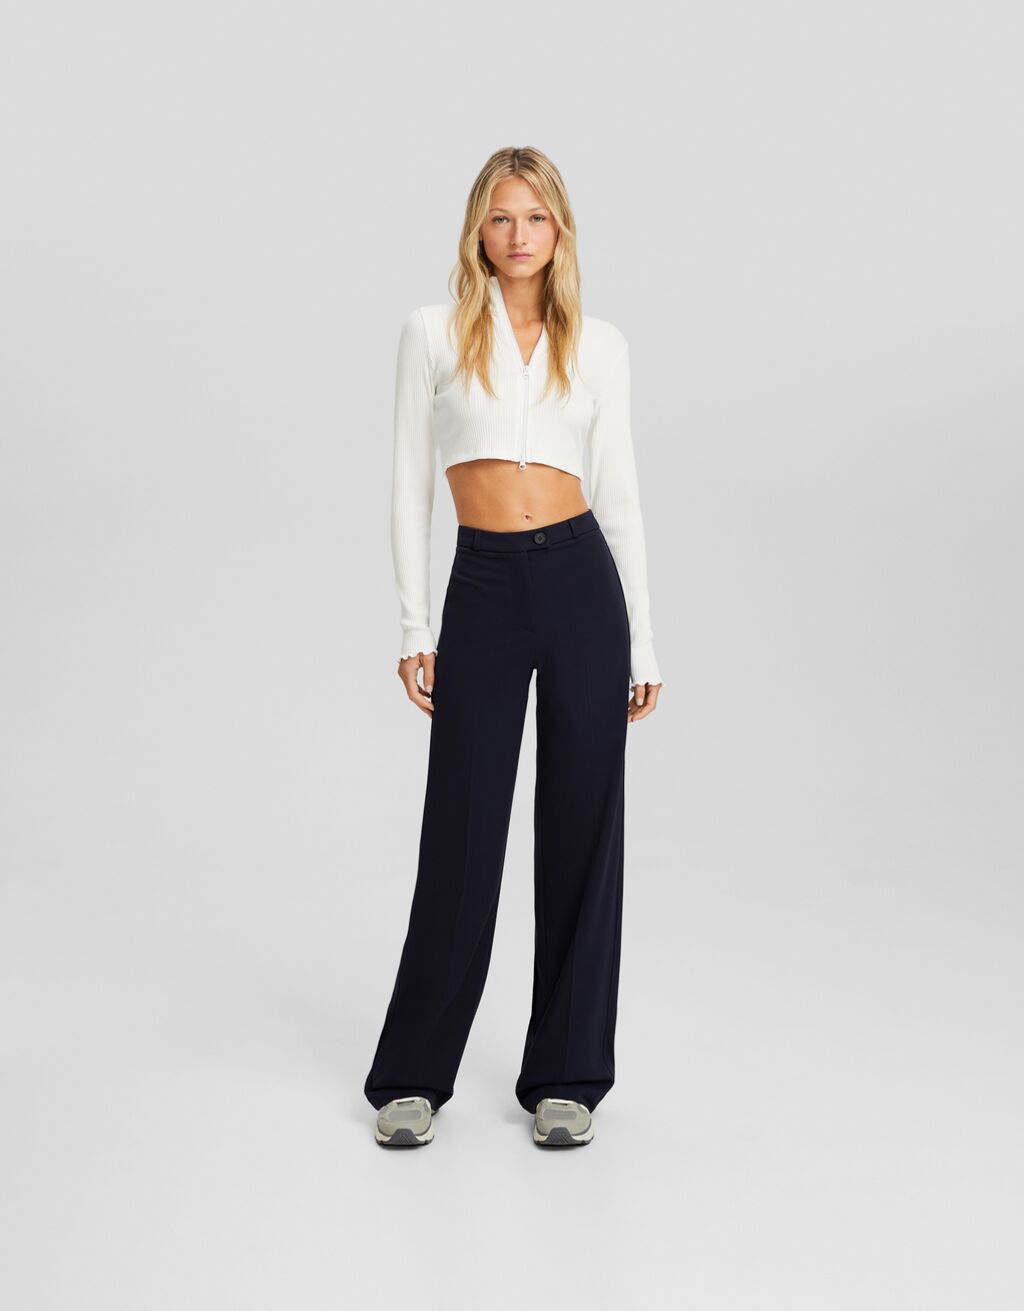 SHEIN Frenchy Adjustable Belted Cropped Tailored Pants | SHEIN USA